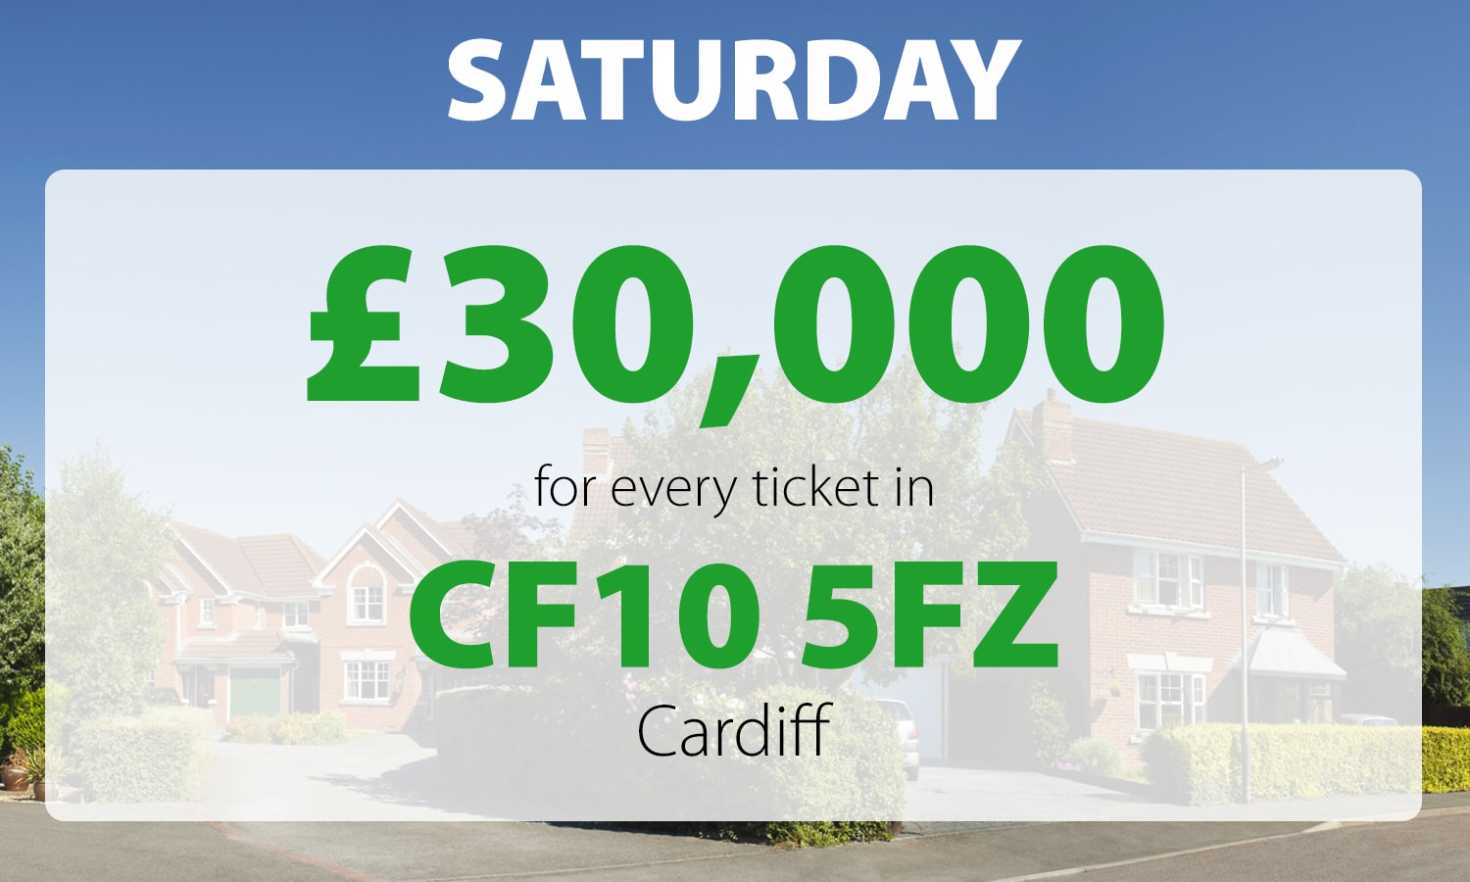 One Cardiff player has scooped a fabulous £30,000 prize thanks to their postcode